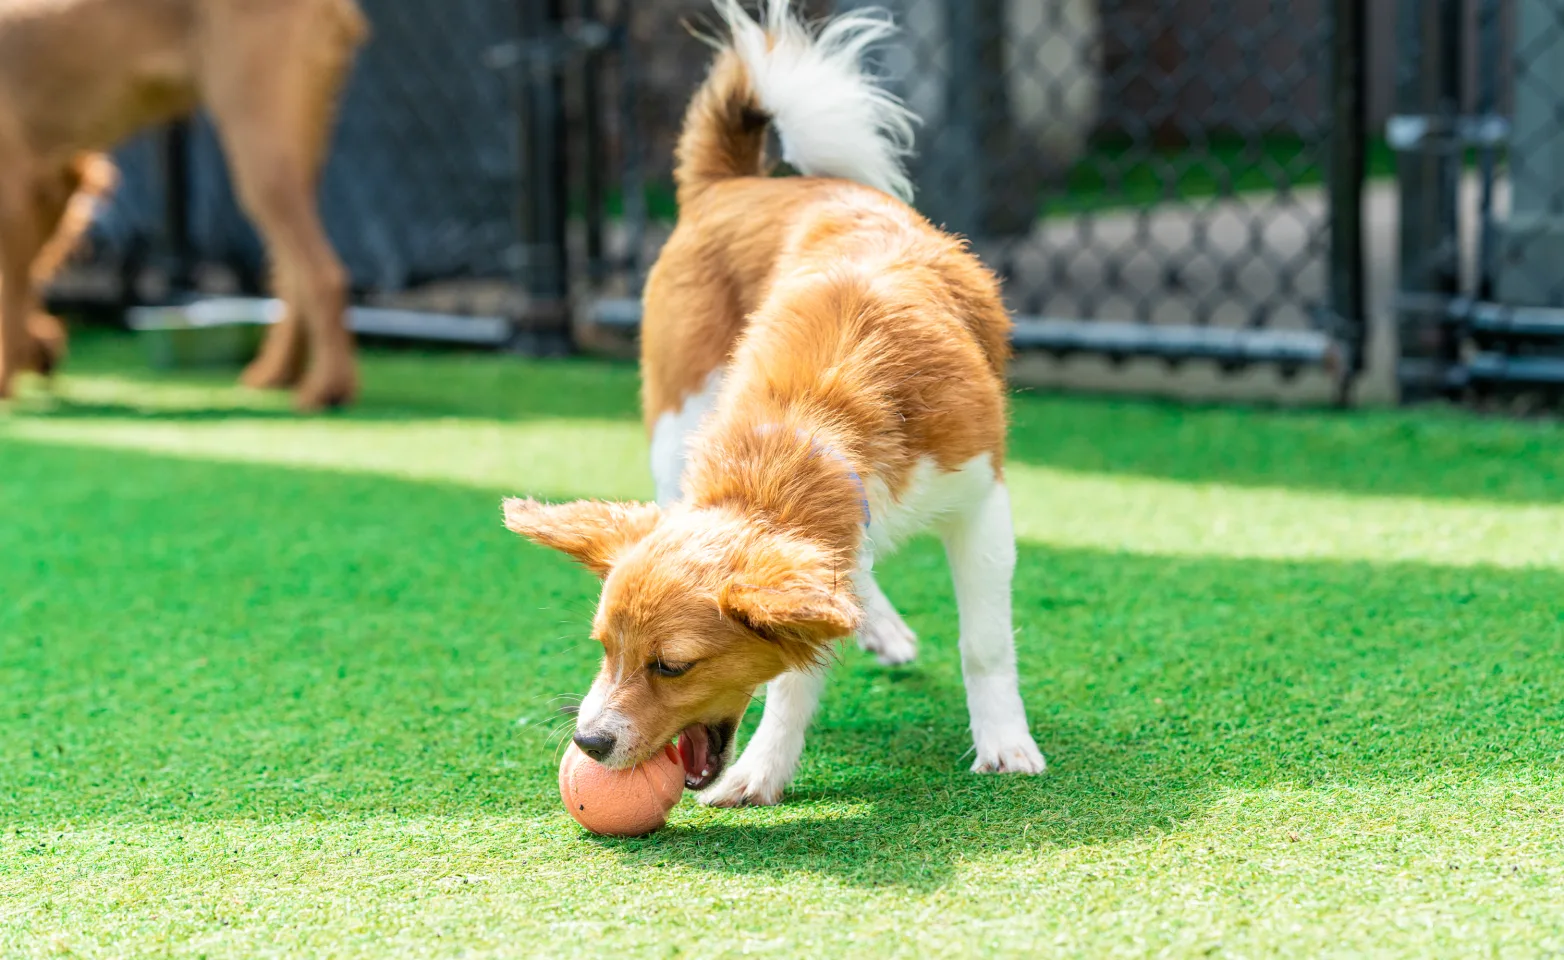 A dog playing with a ball on green turf